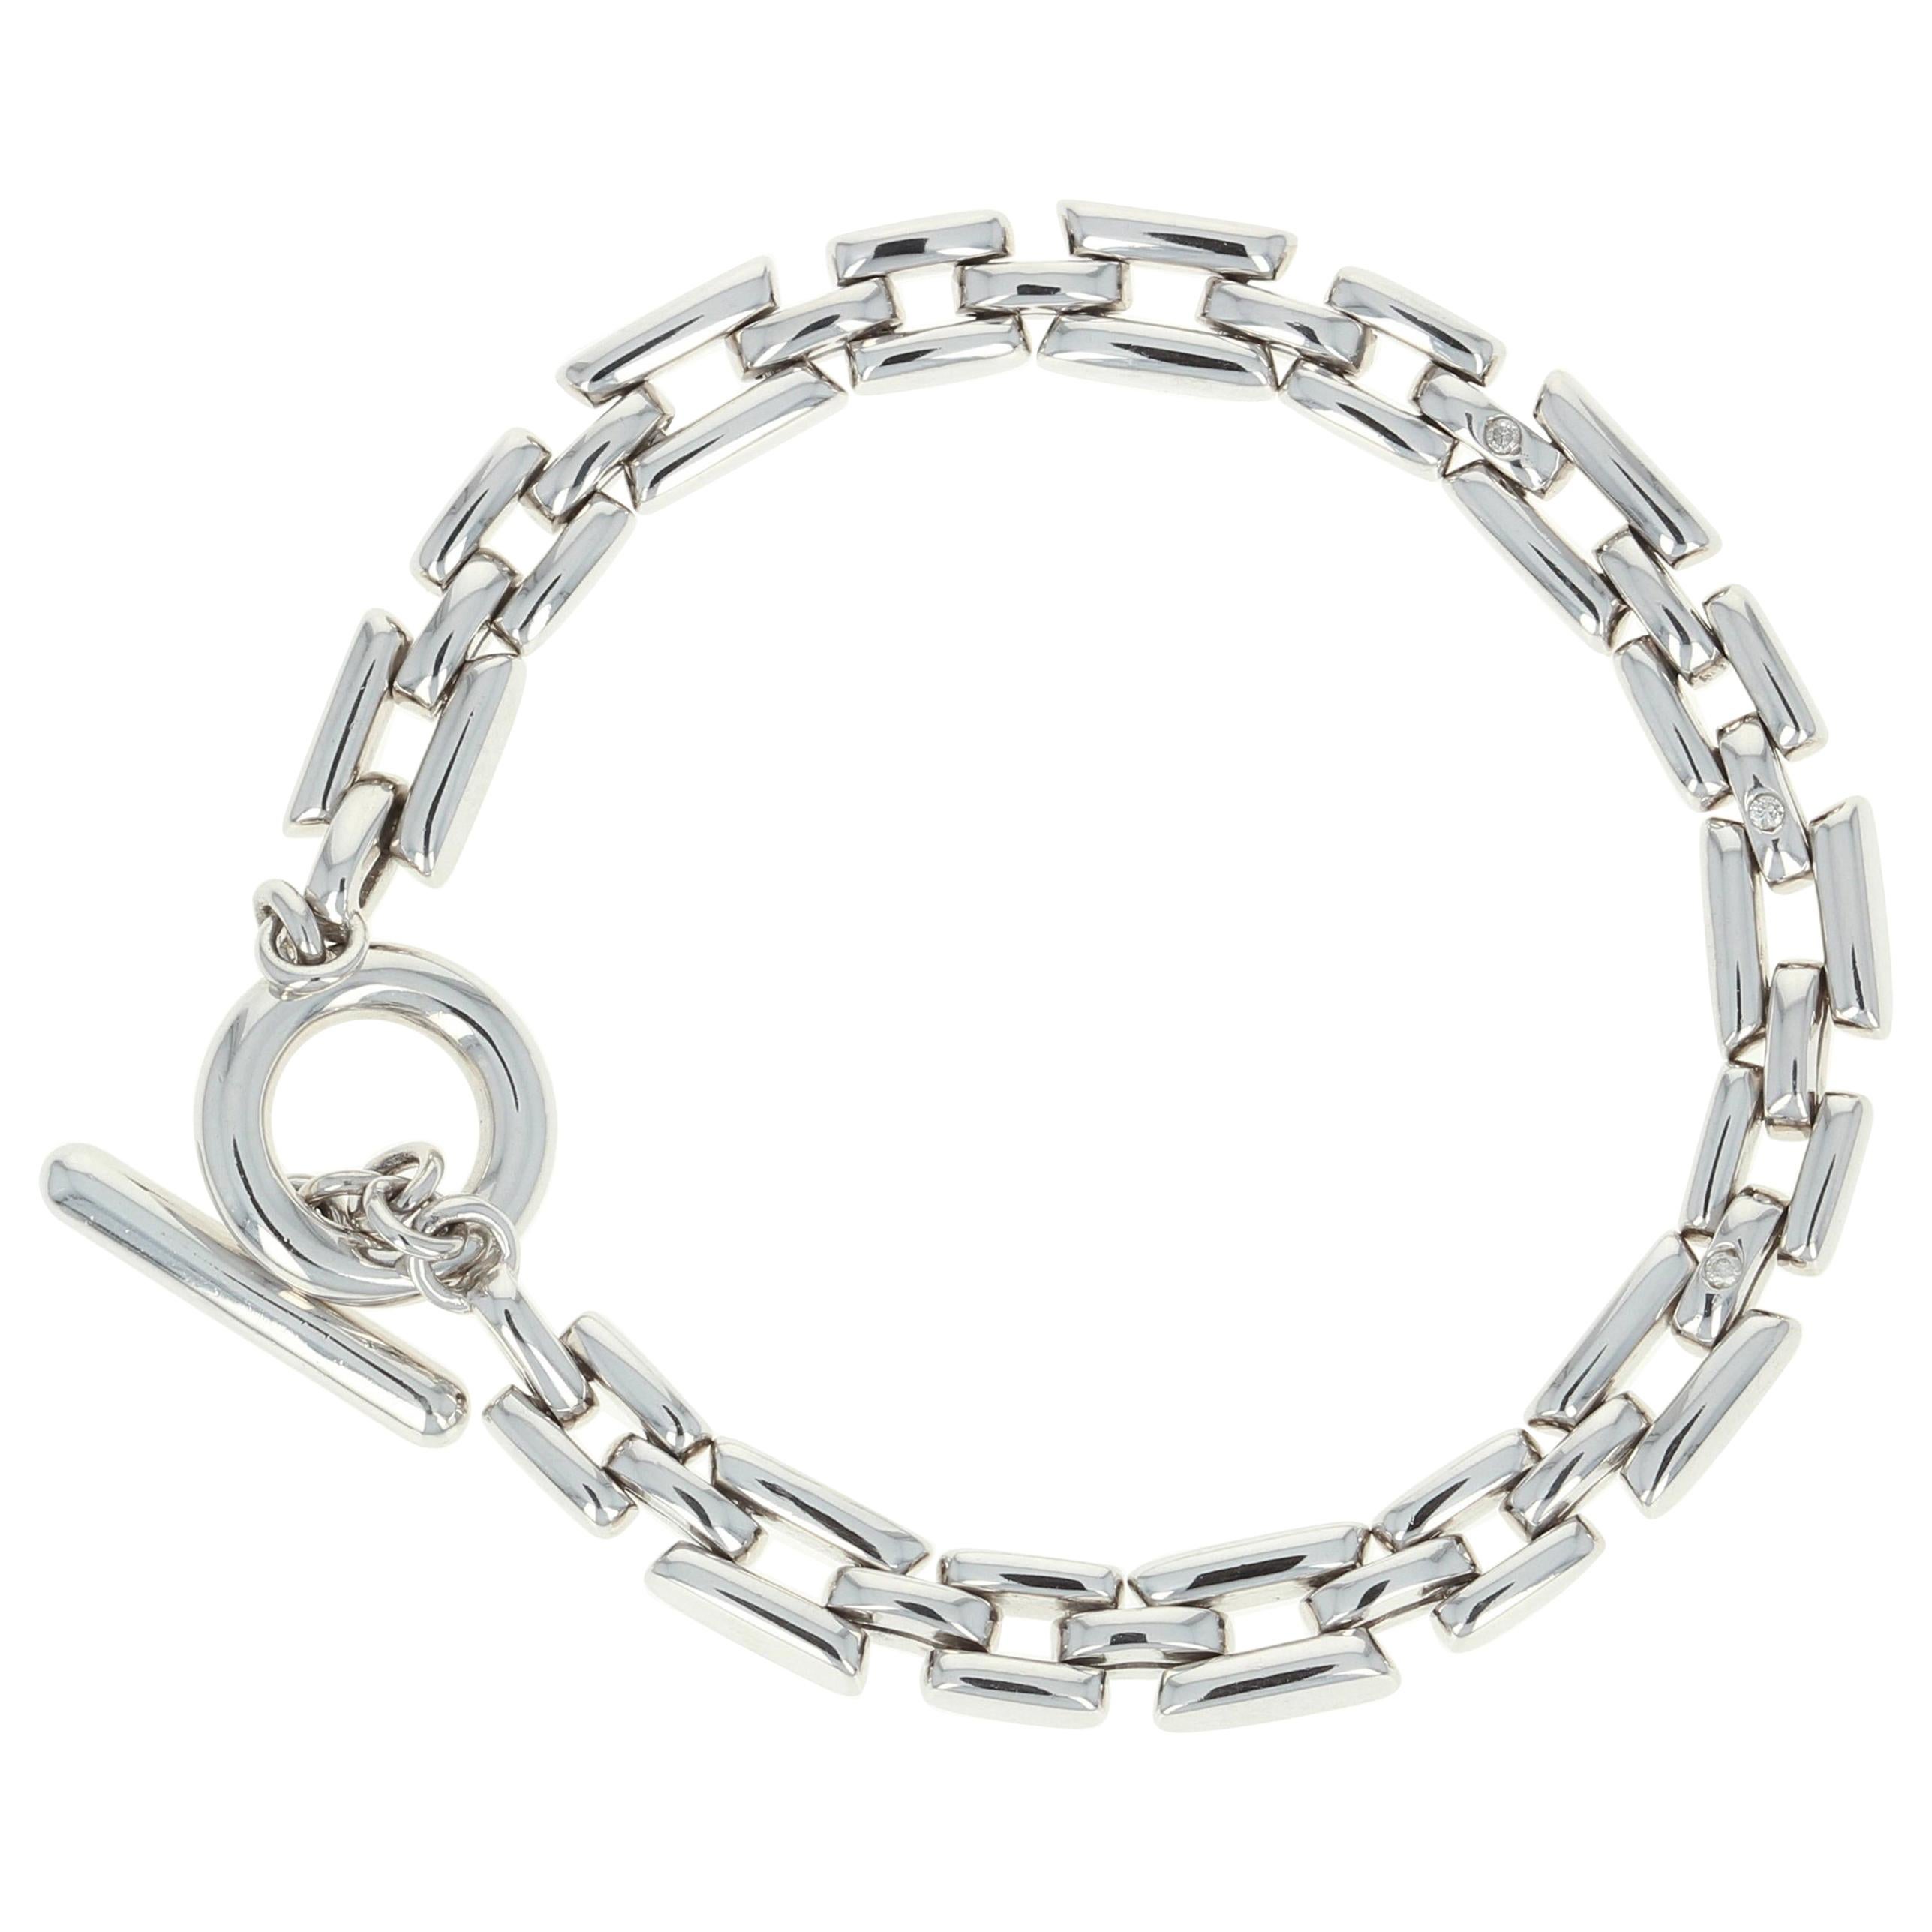 New Round Cut Diamond-Accented Link Bracelet, Silver Toggle Clasp